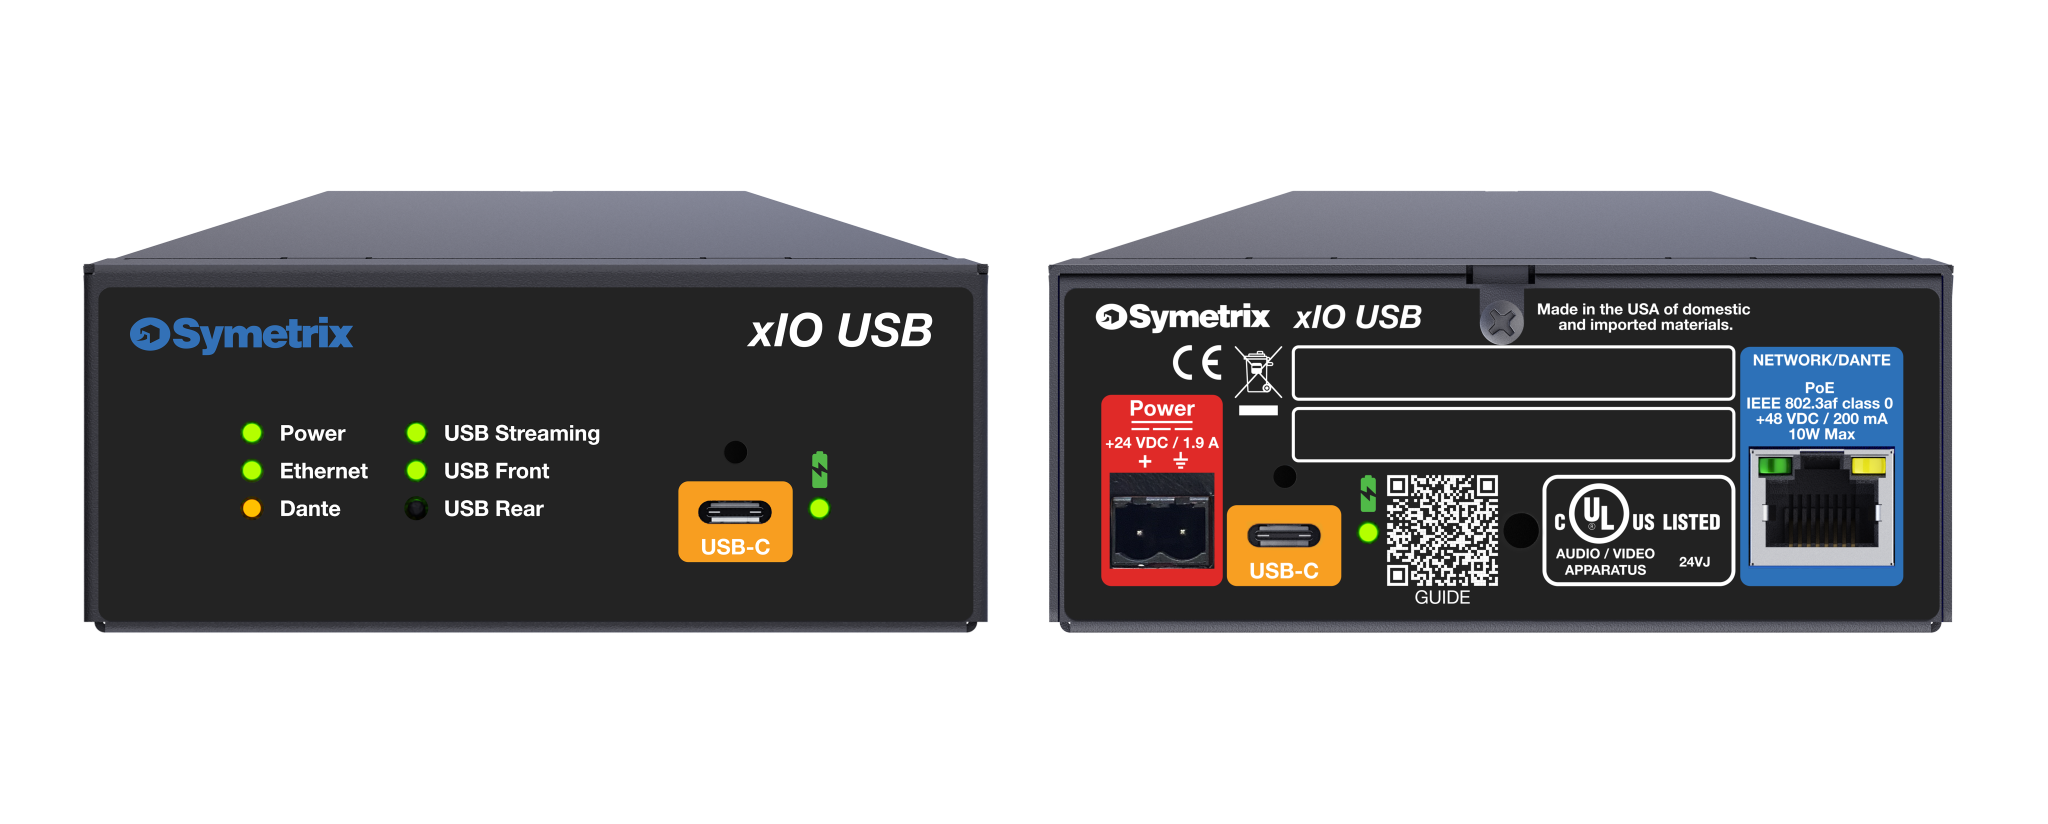 The xIO USB performance endpoint from Symetrix